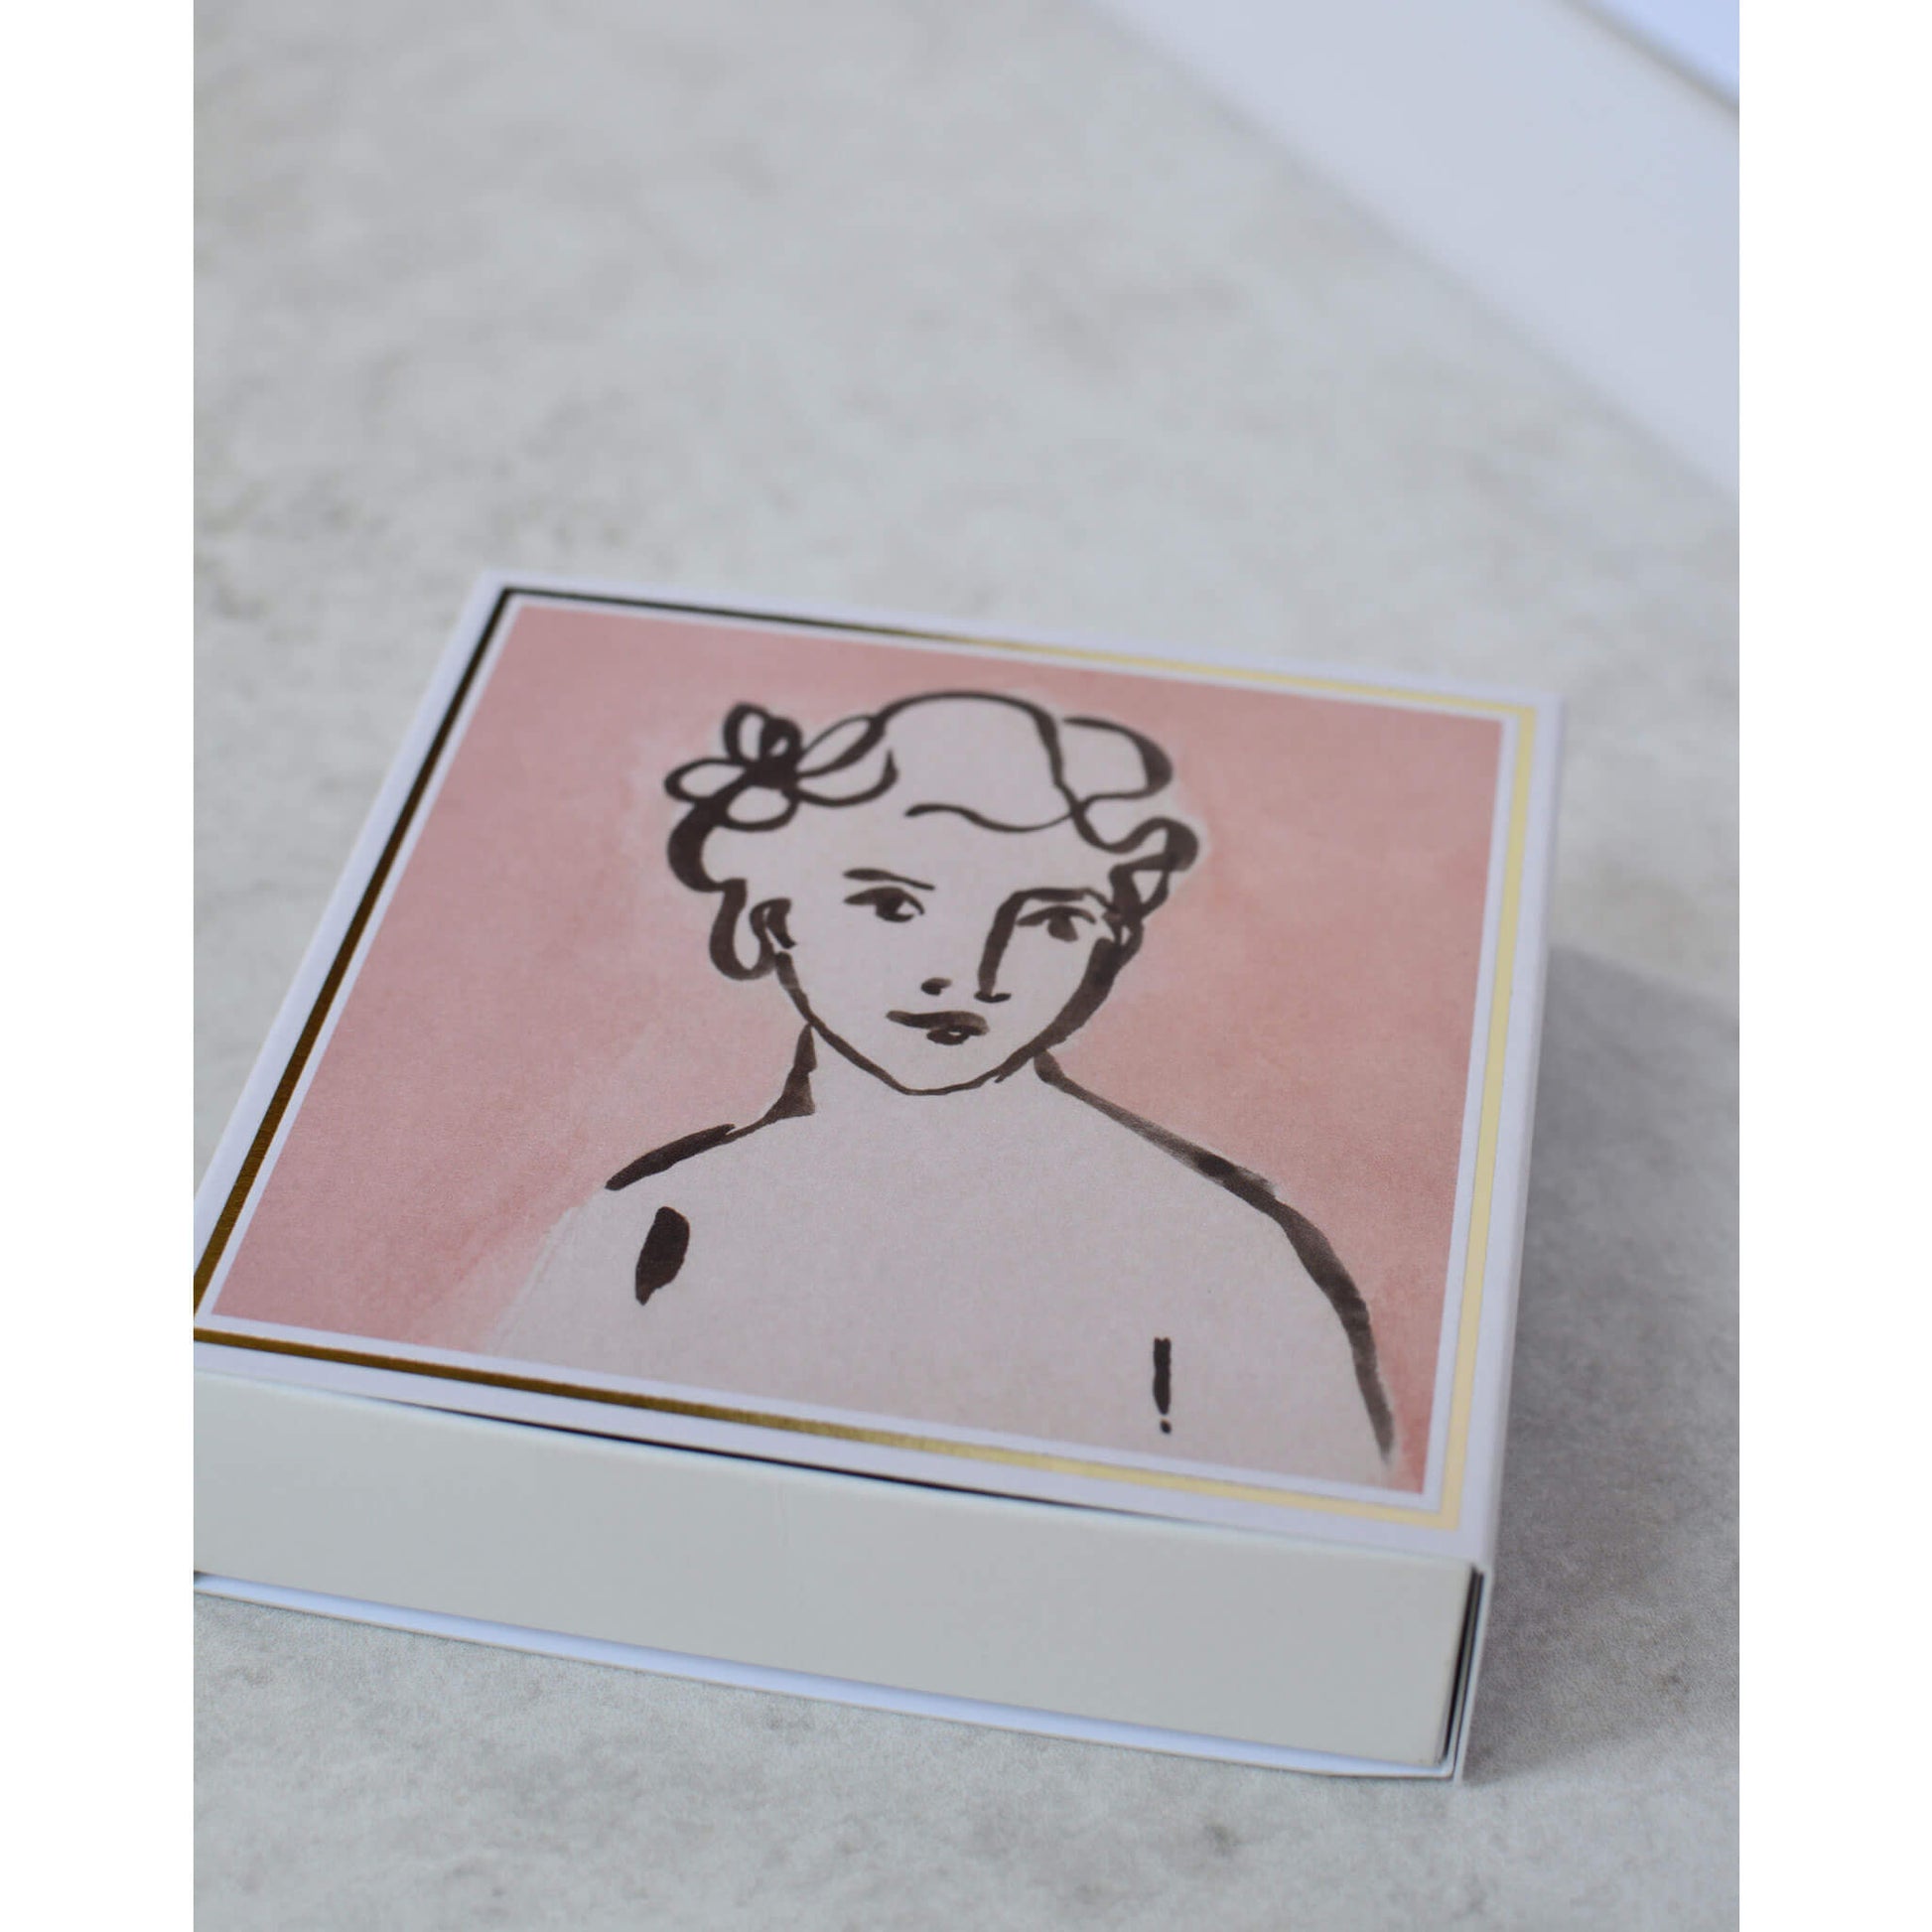 Square matchbox featuring an illustration of a woman on a pink background.